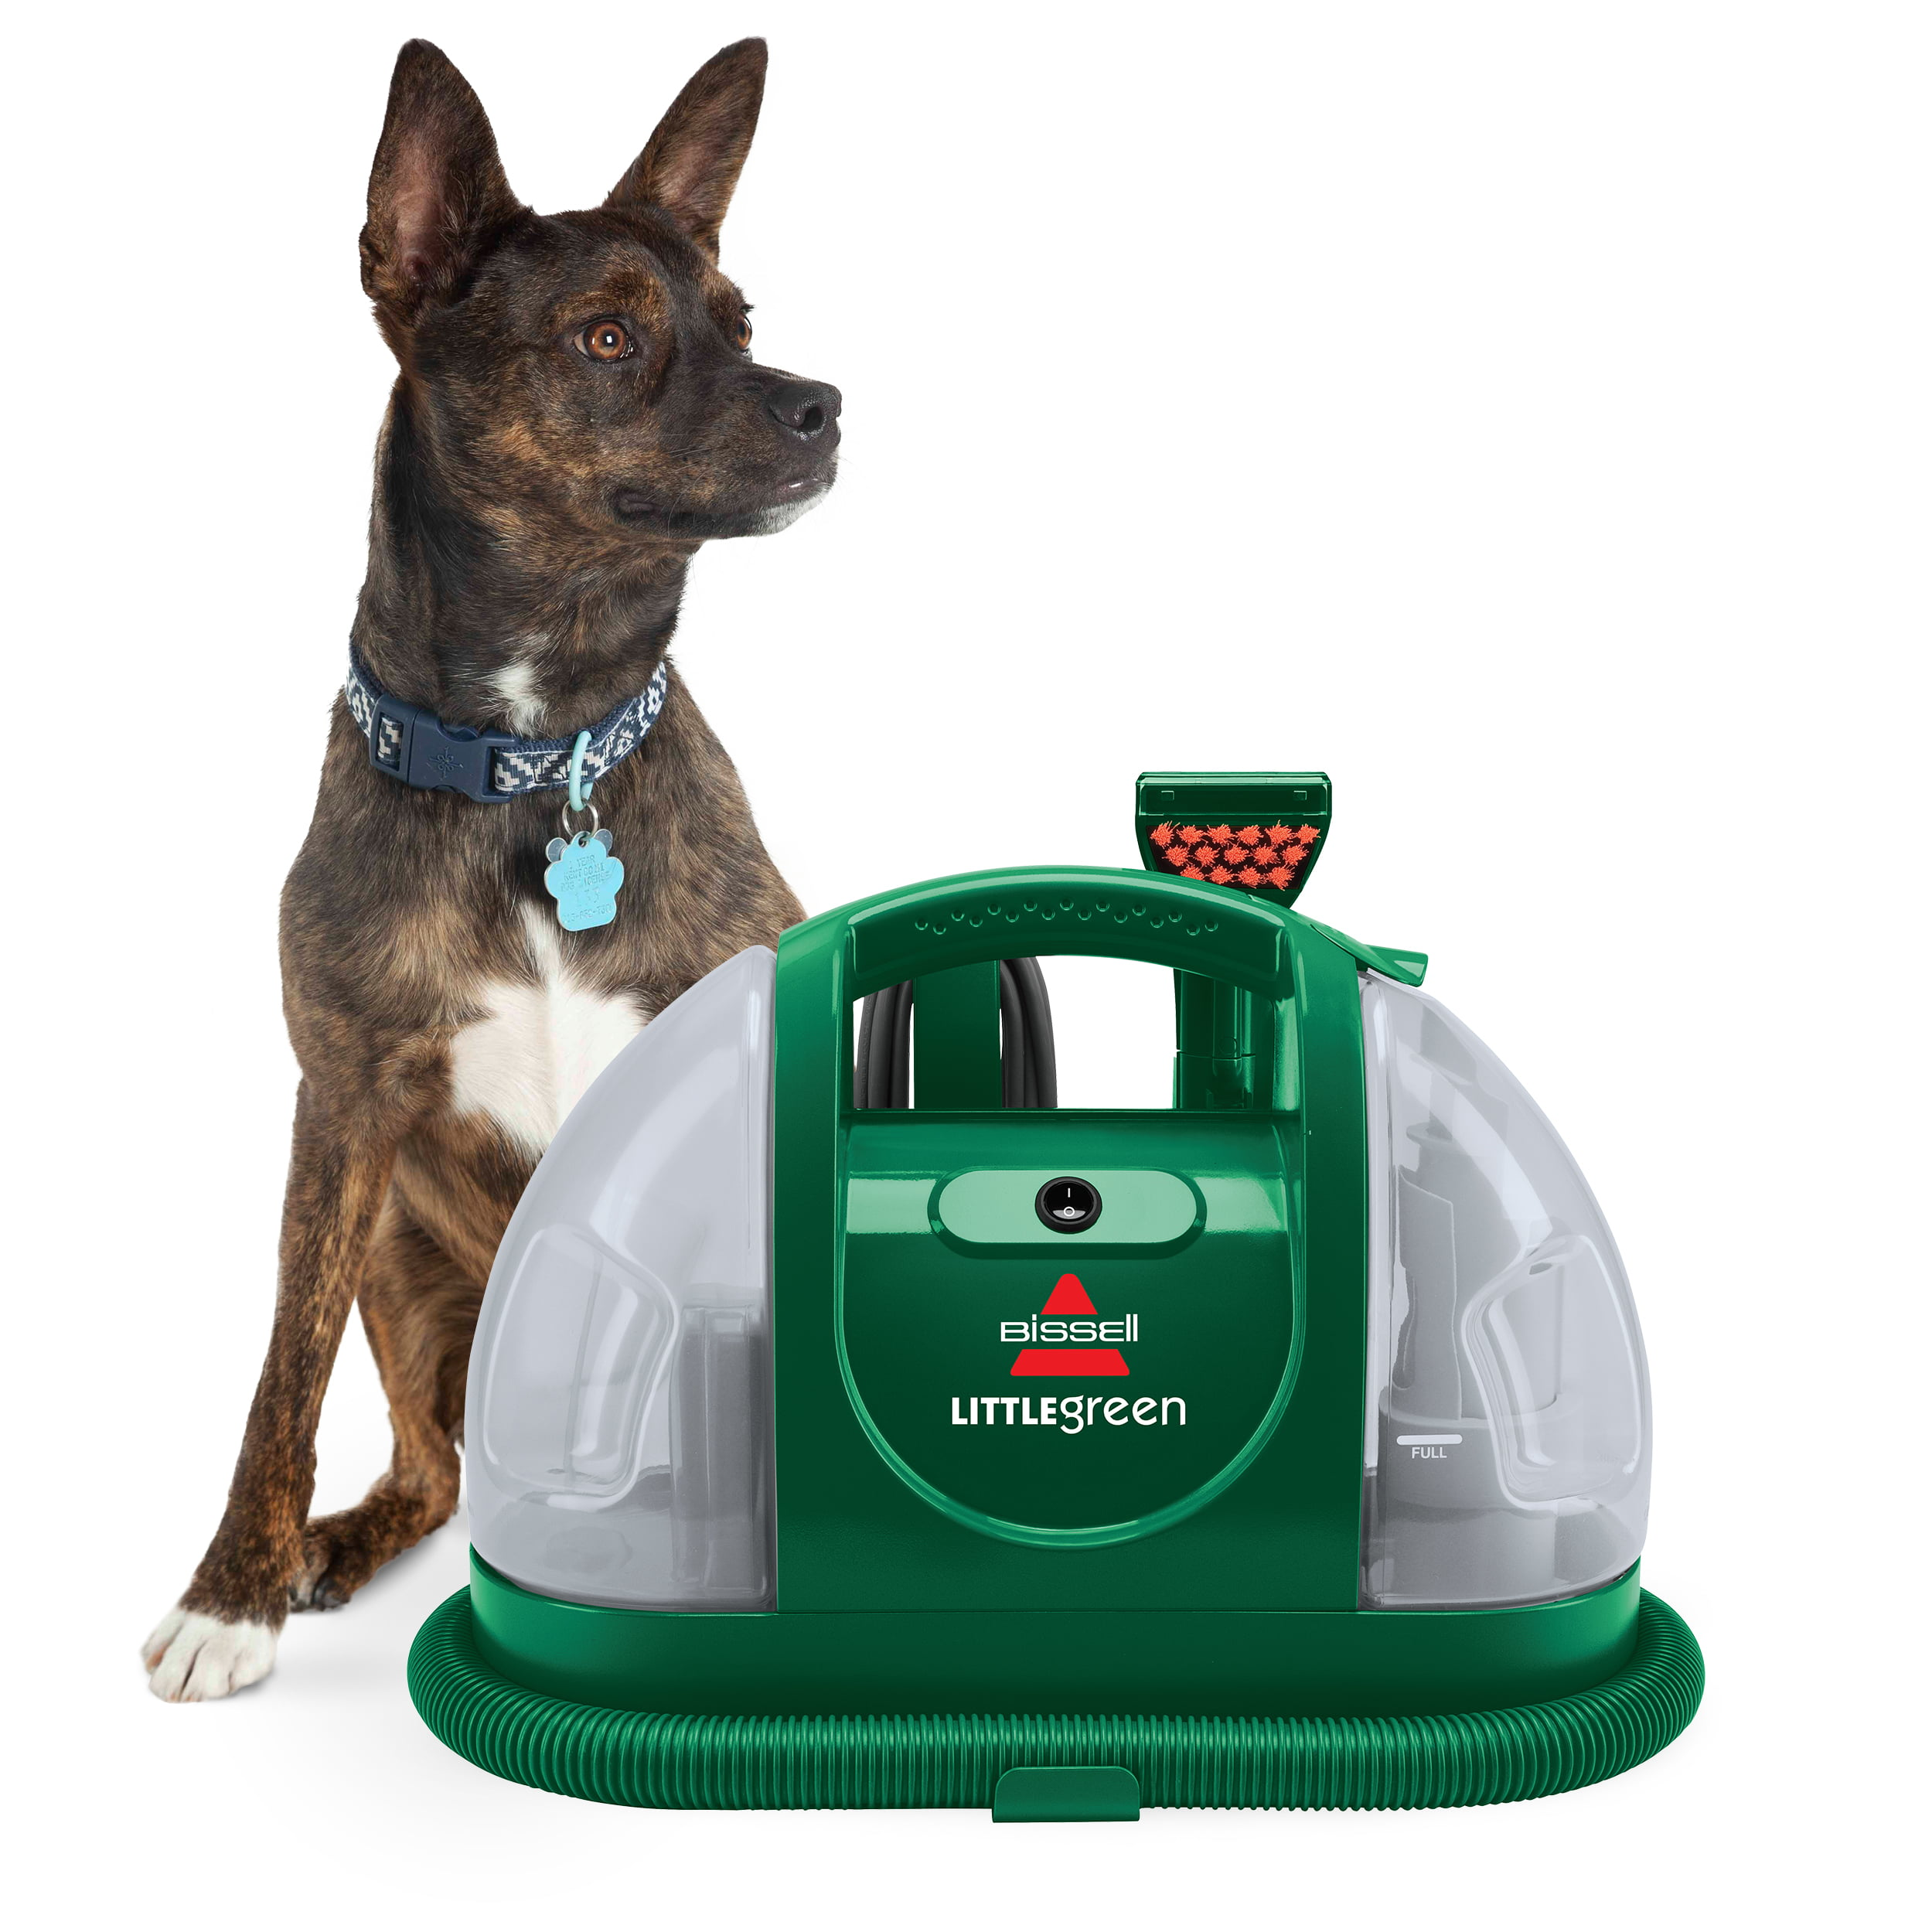 BISSELL Little Green Portable Spot and Stain Cleaner, 1400M, $69, free shipping, Walmart $69